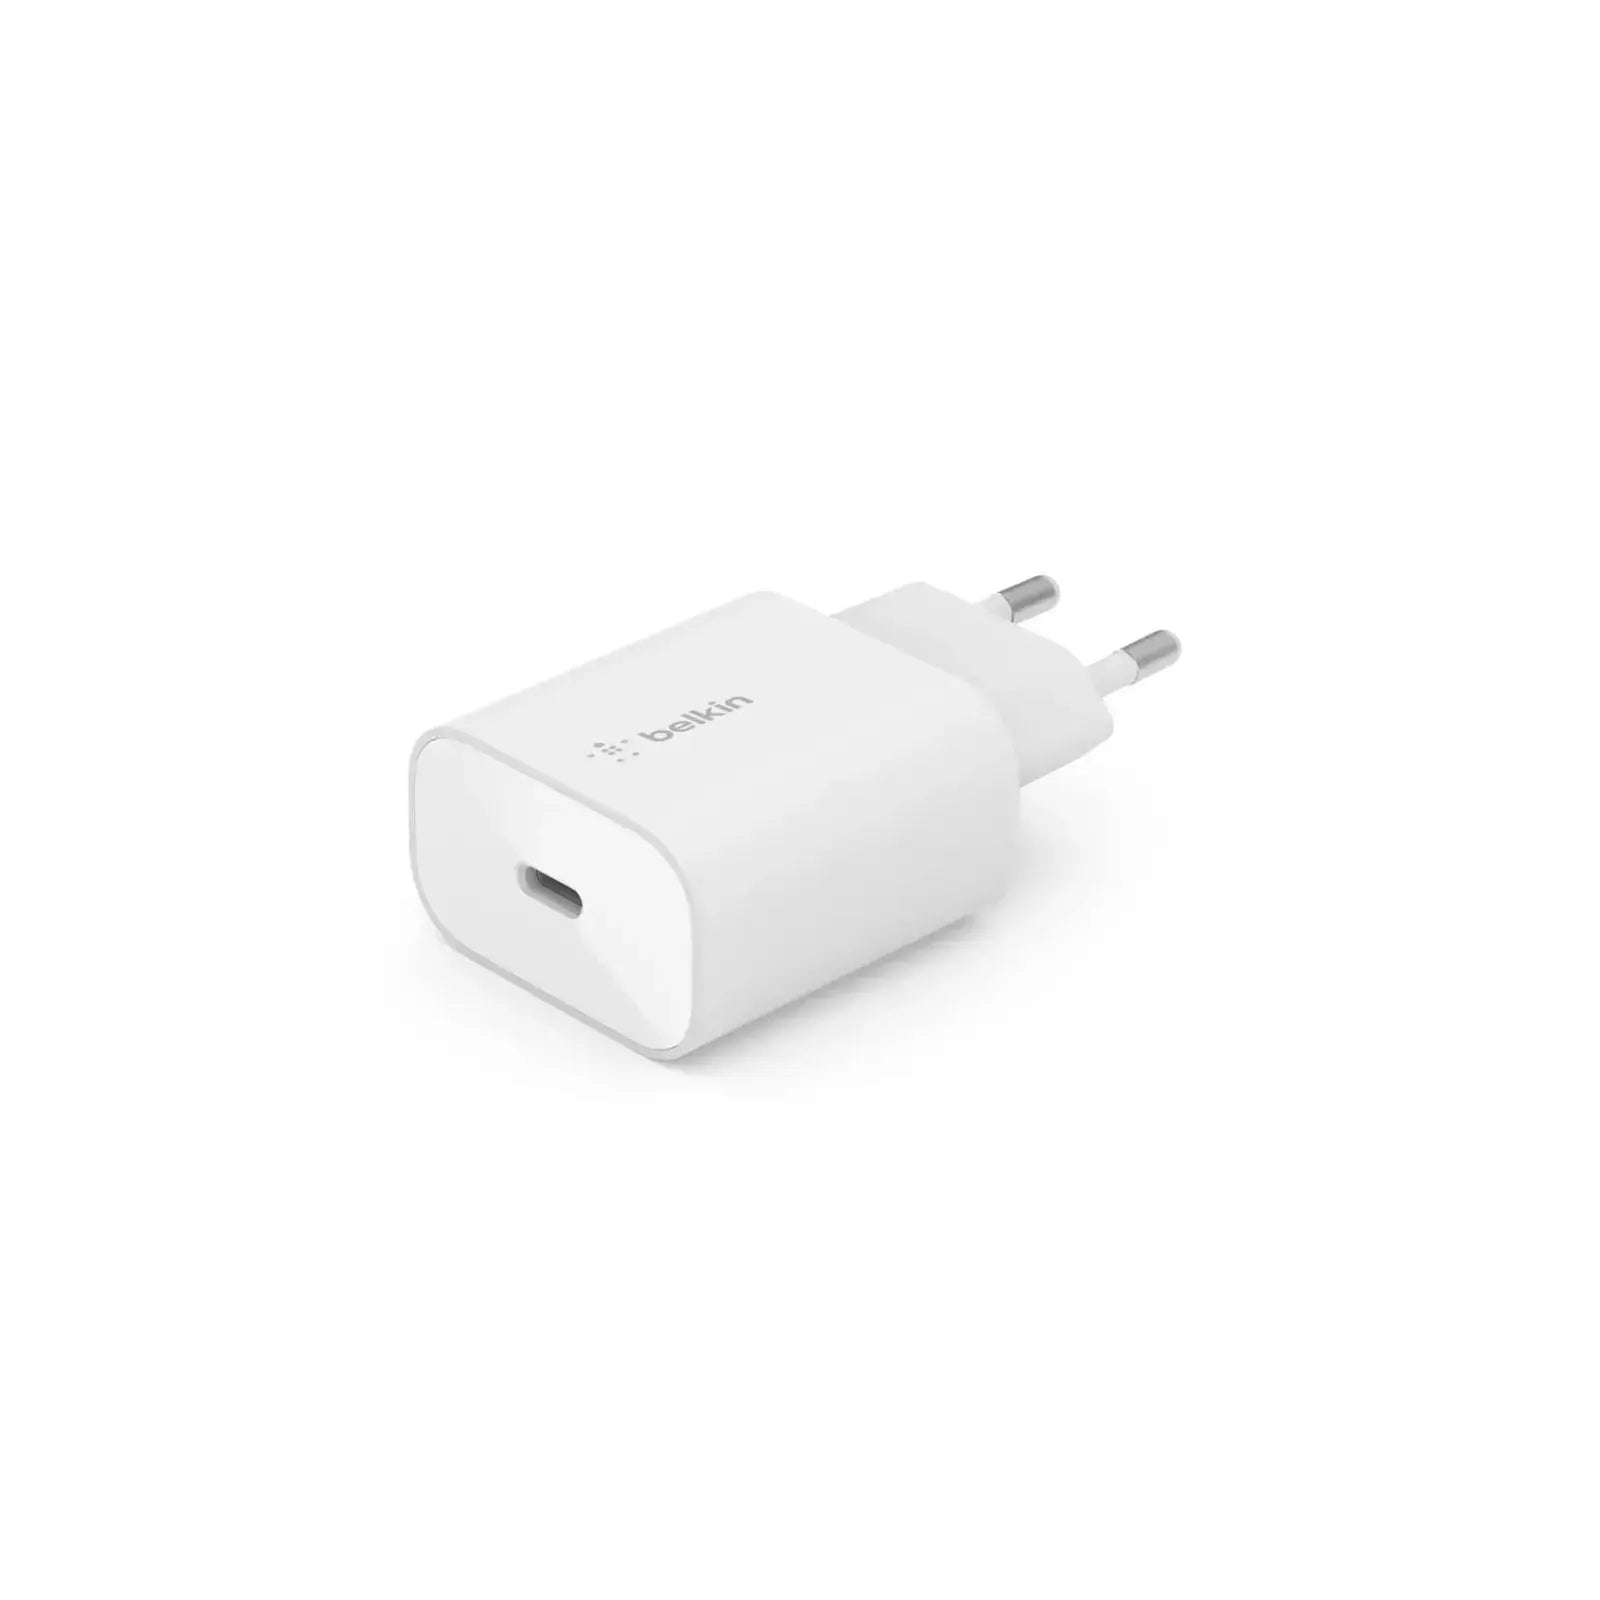 Belkin 25W USB-C PD Wall Charger With PPS for SAMSUNG and APPLE – WCA004VFWH Belkin